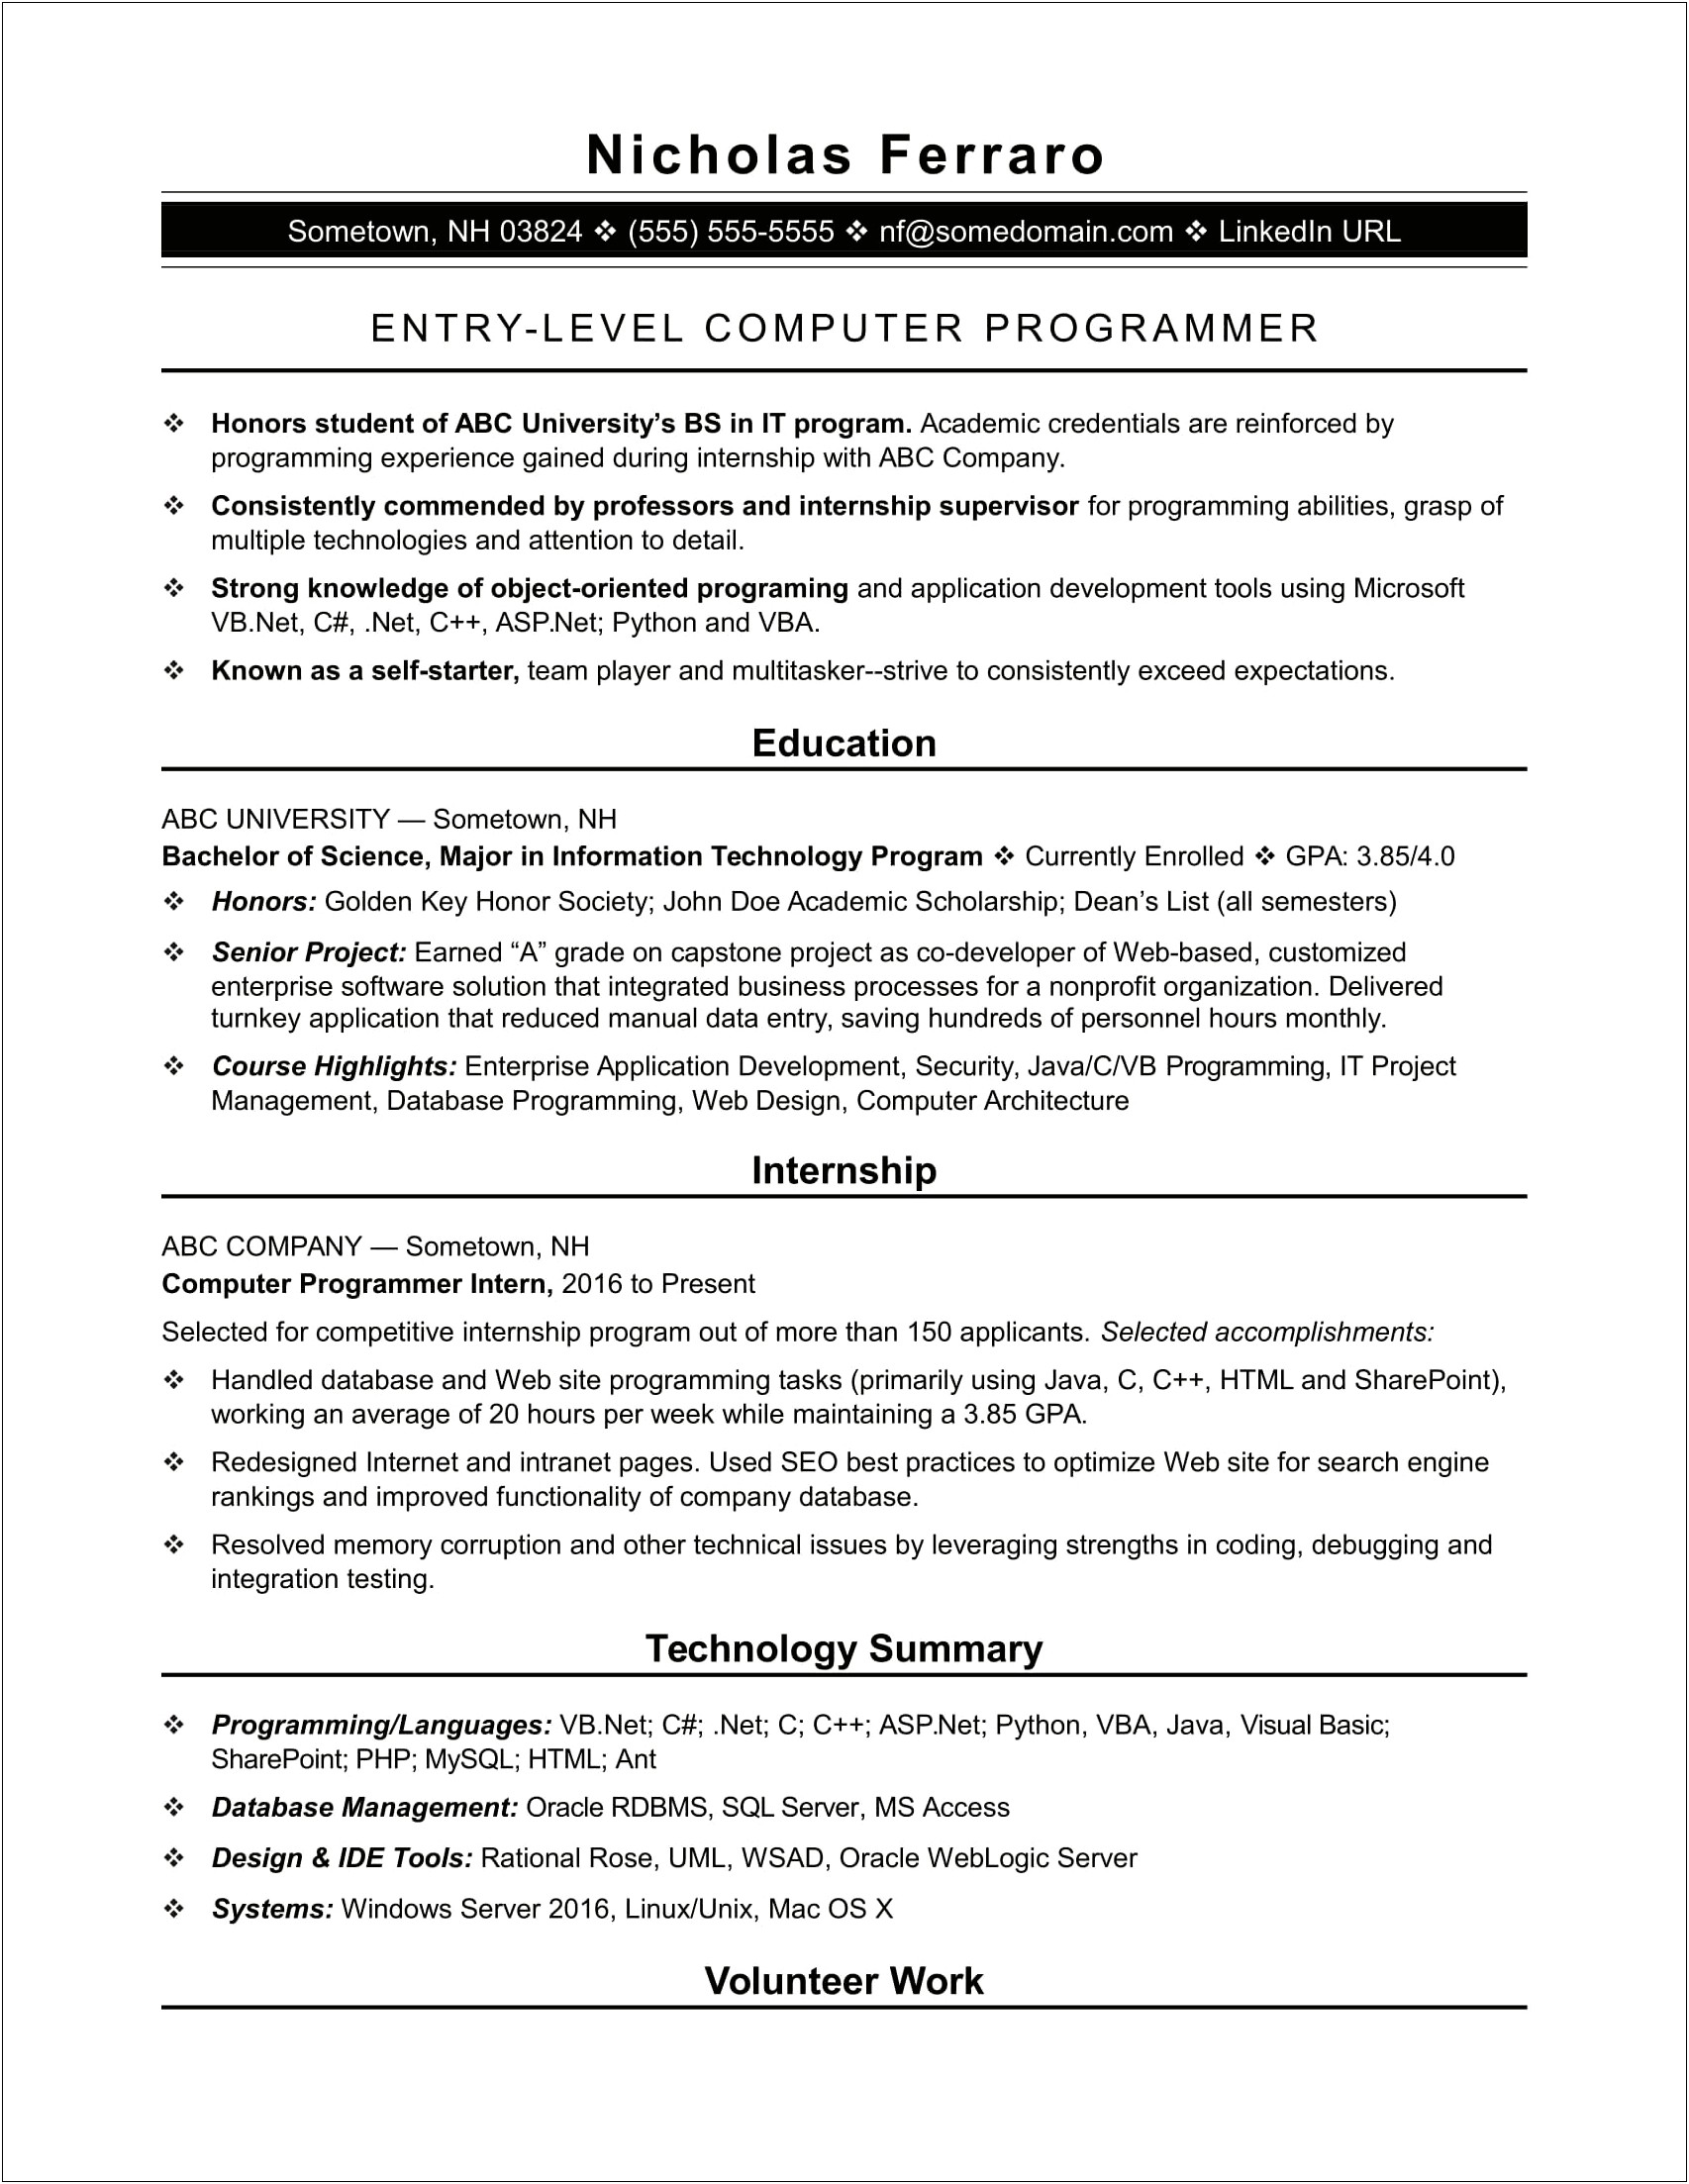 Engineering Programming Projects That Look Good On Resume